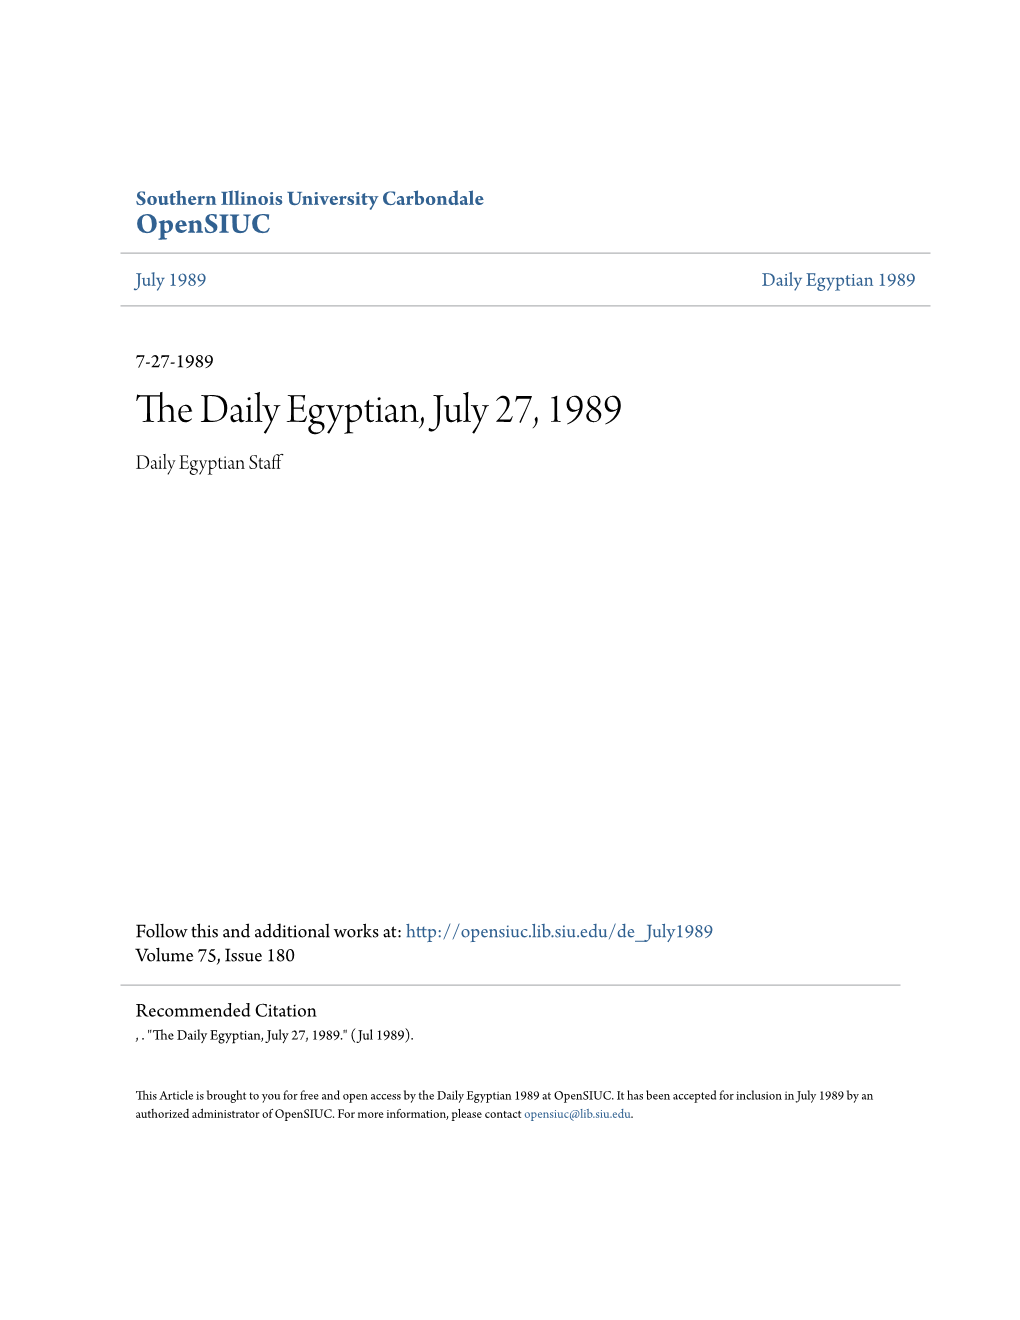 The Daily Egyptian, July 27, 1989